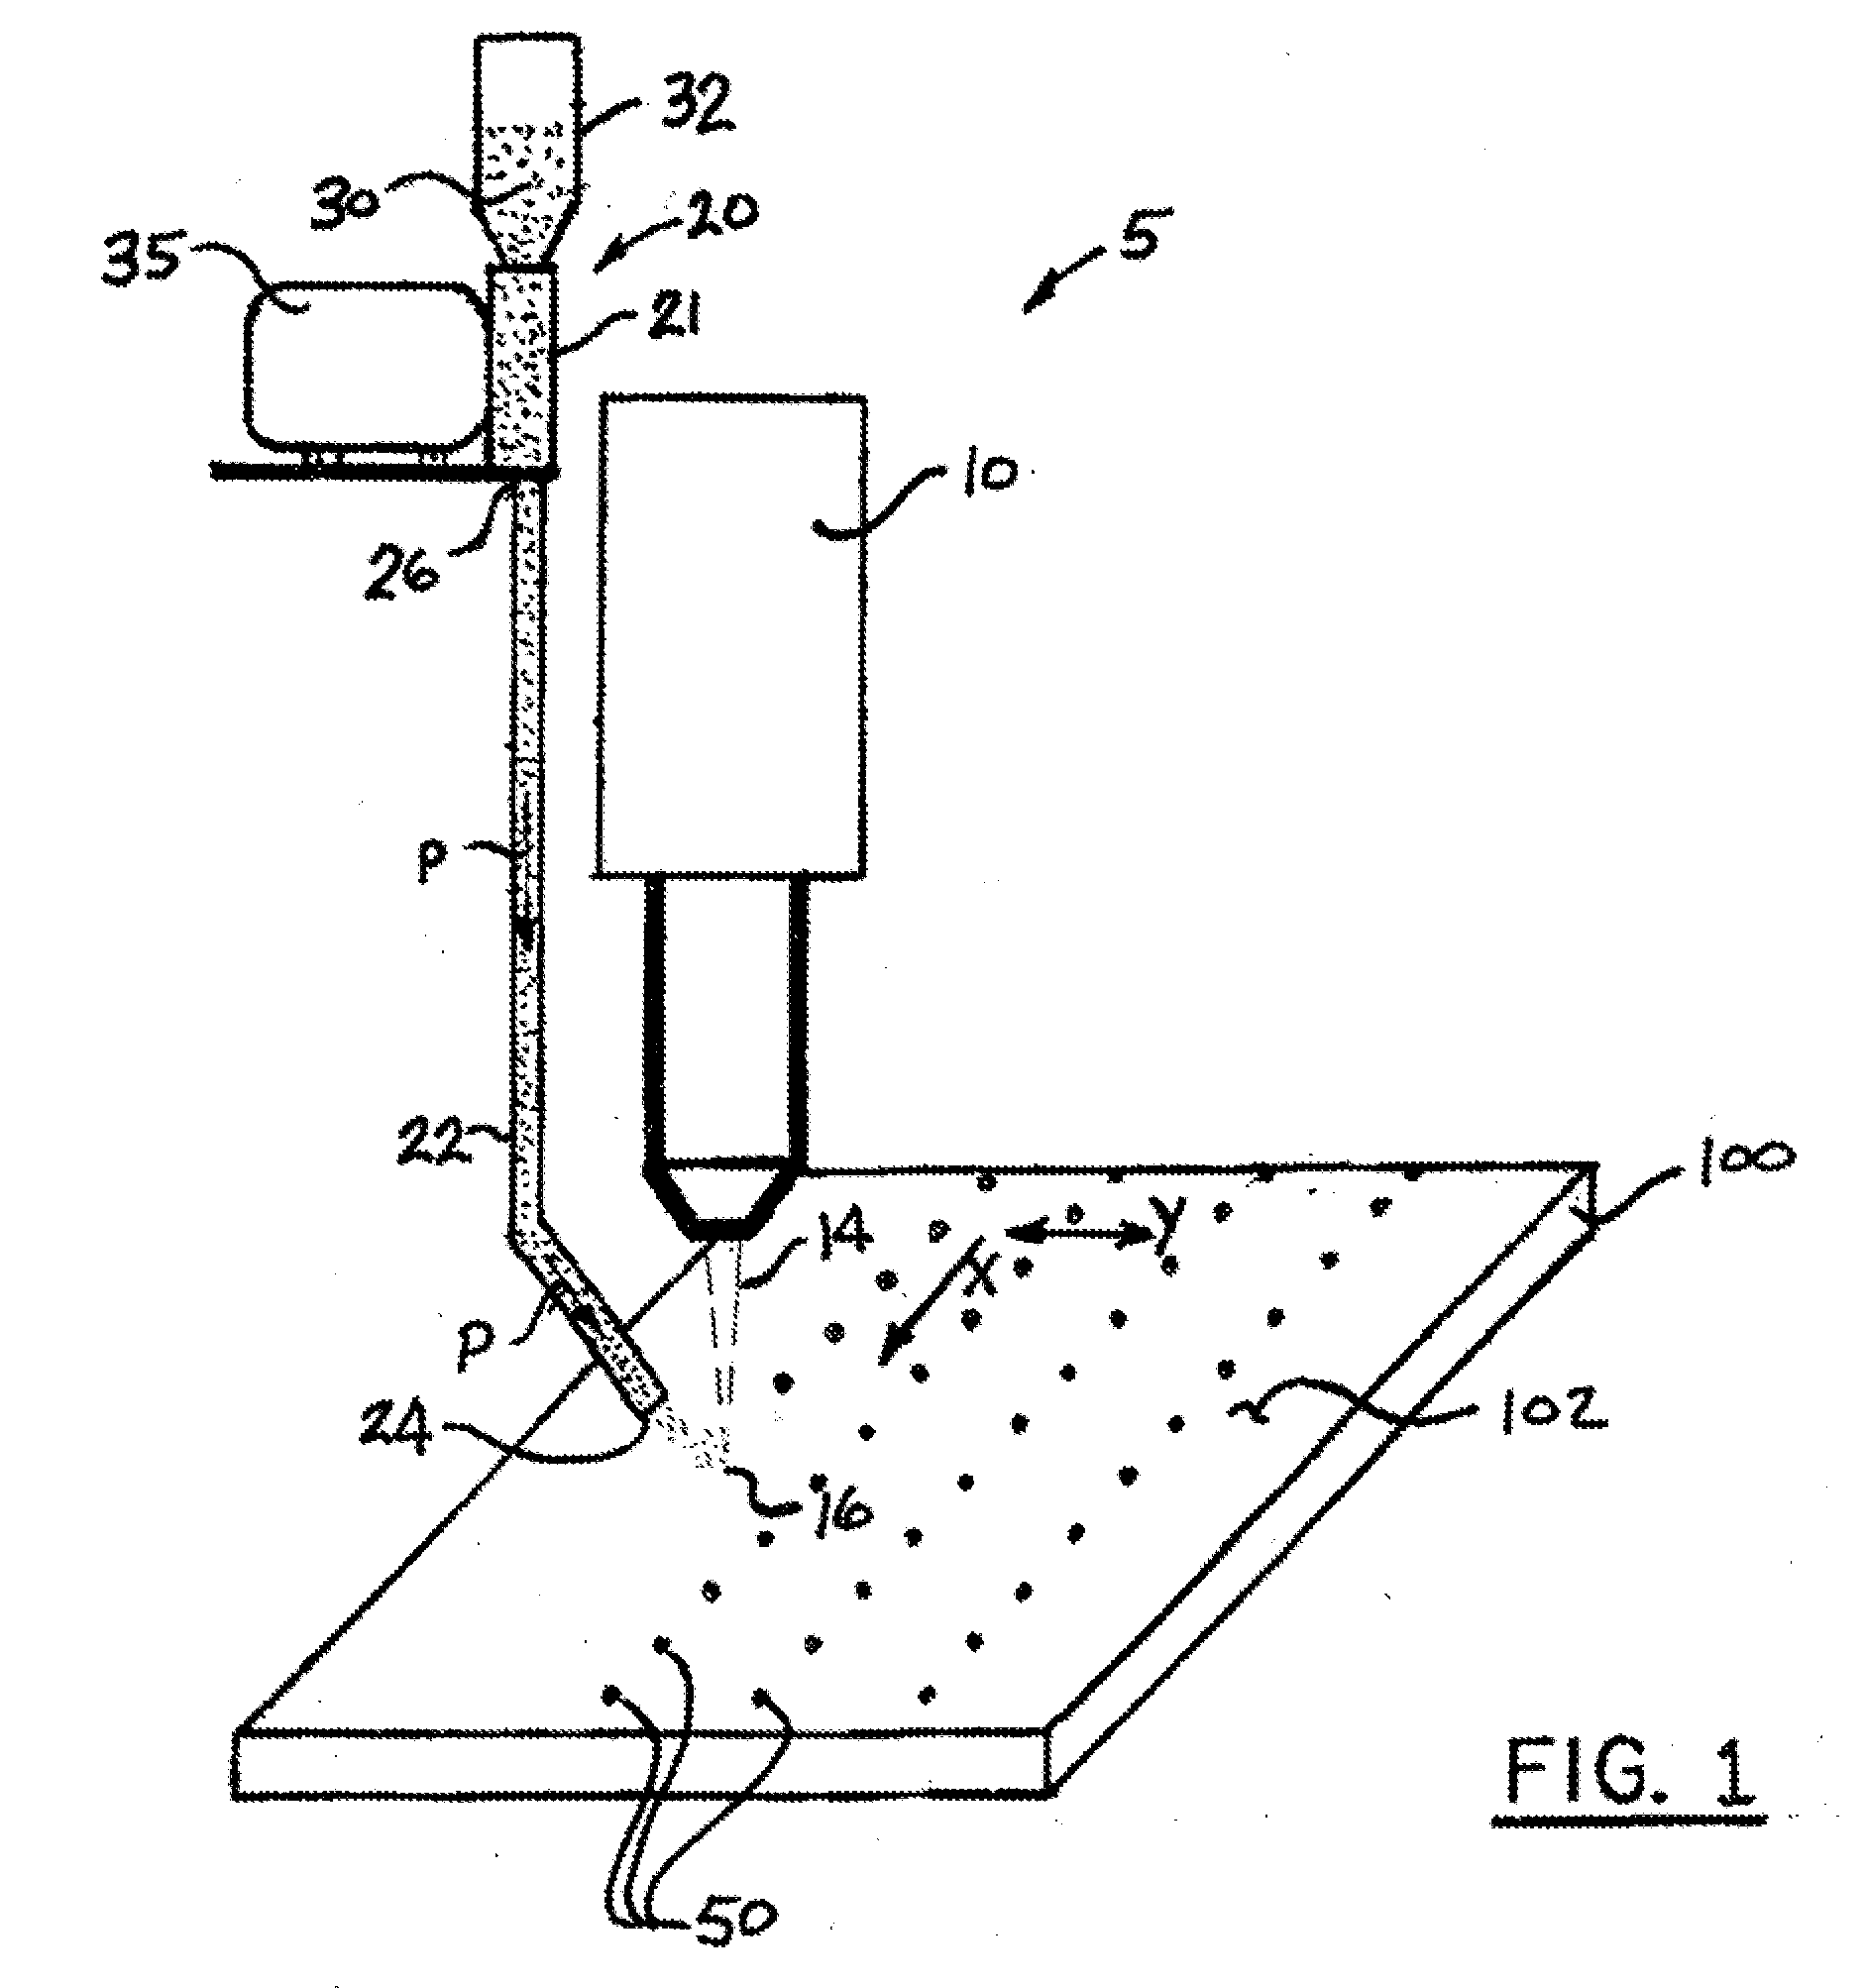 Method and apparatus for depositing raised features at select locations on a substrate to produce a slip-resistant surface